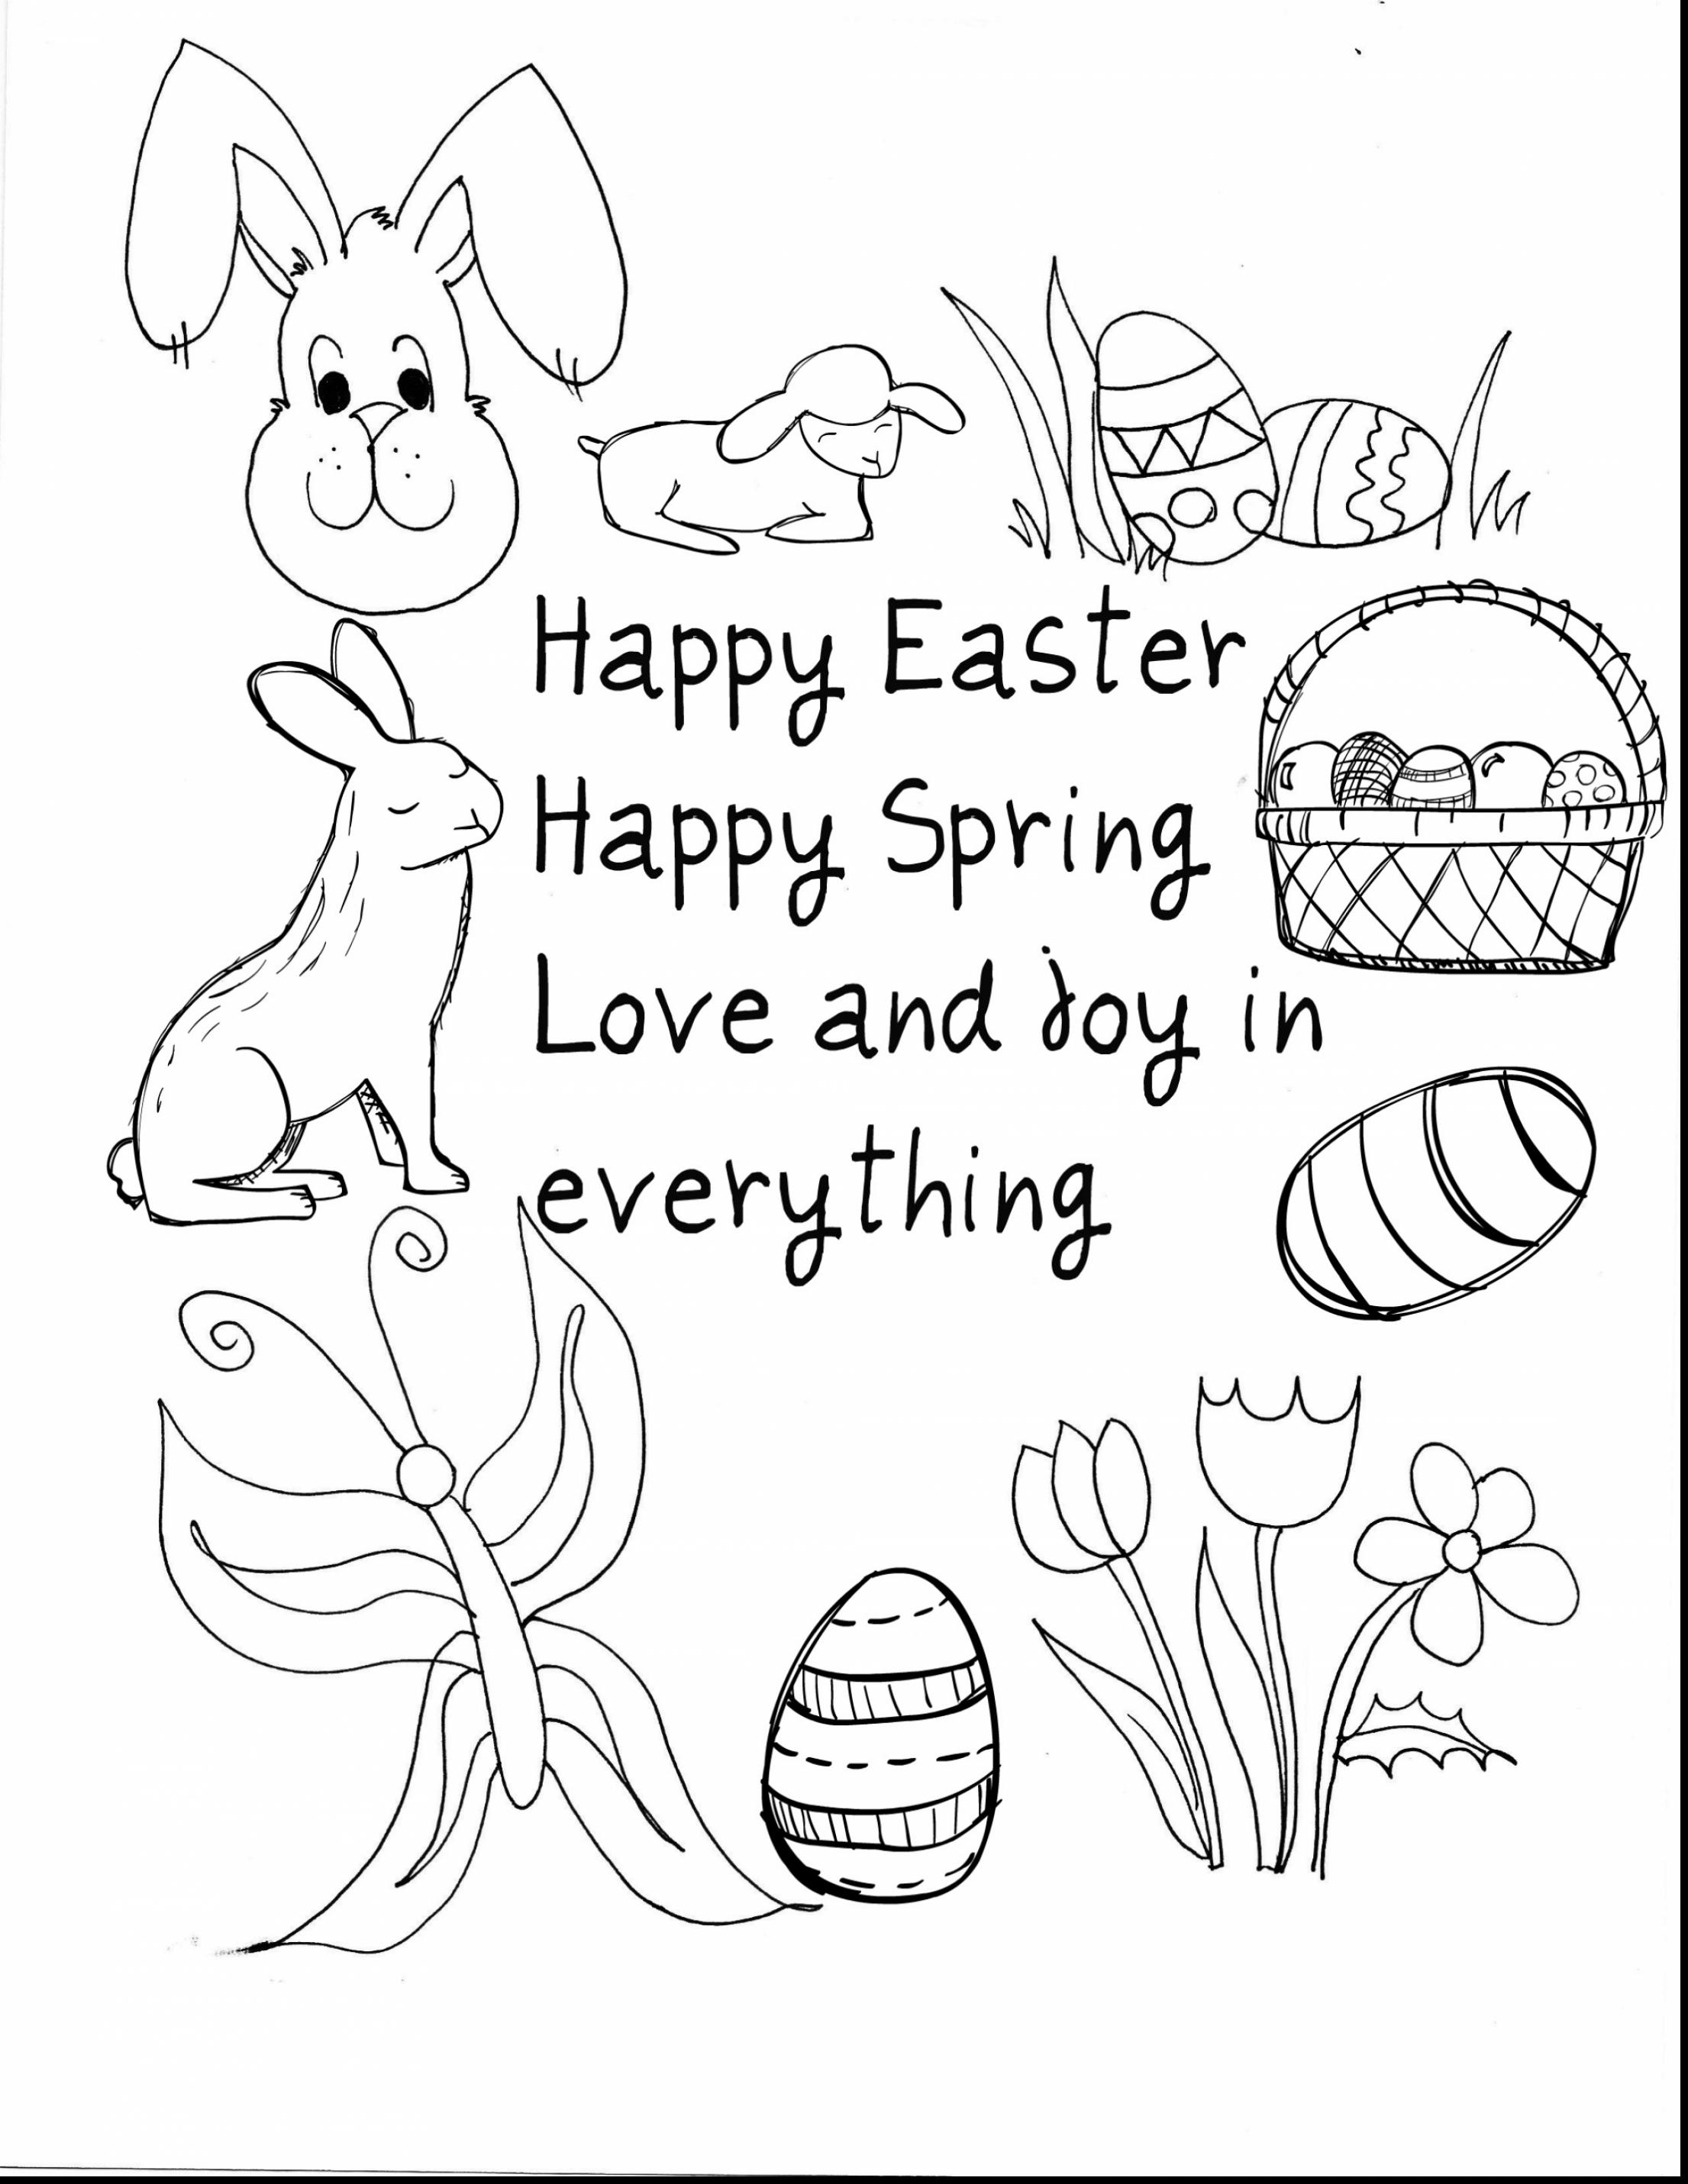 Religious Easter Coloring Pages For Preschoolers at